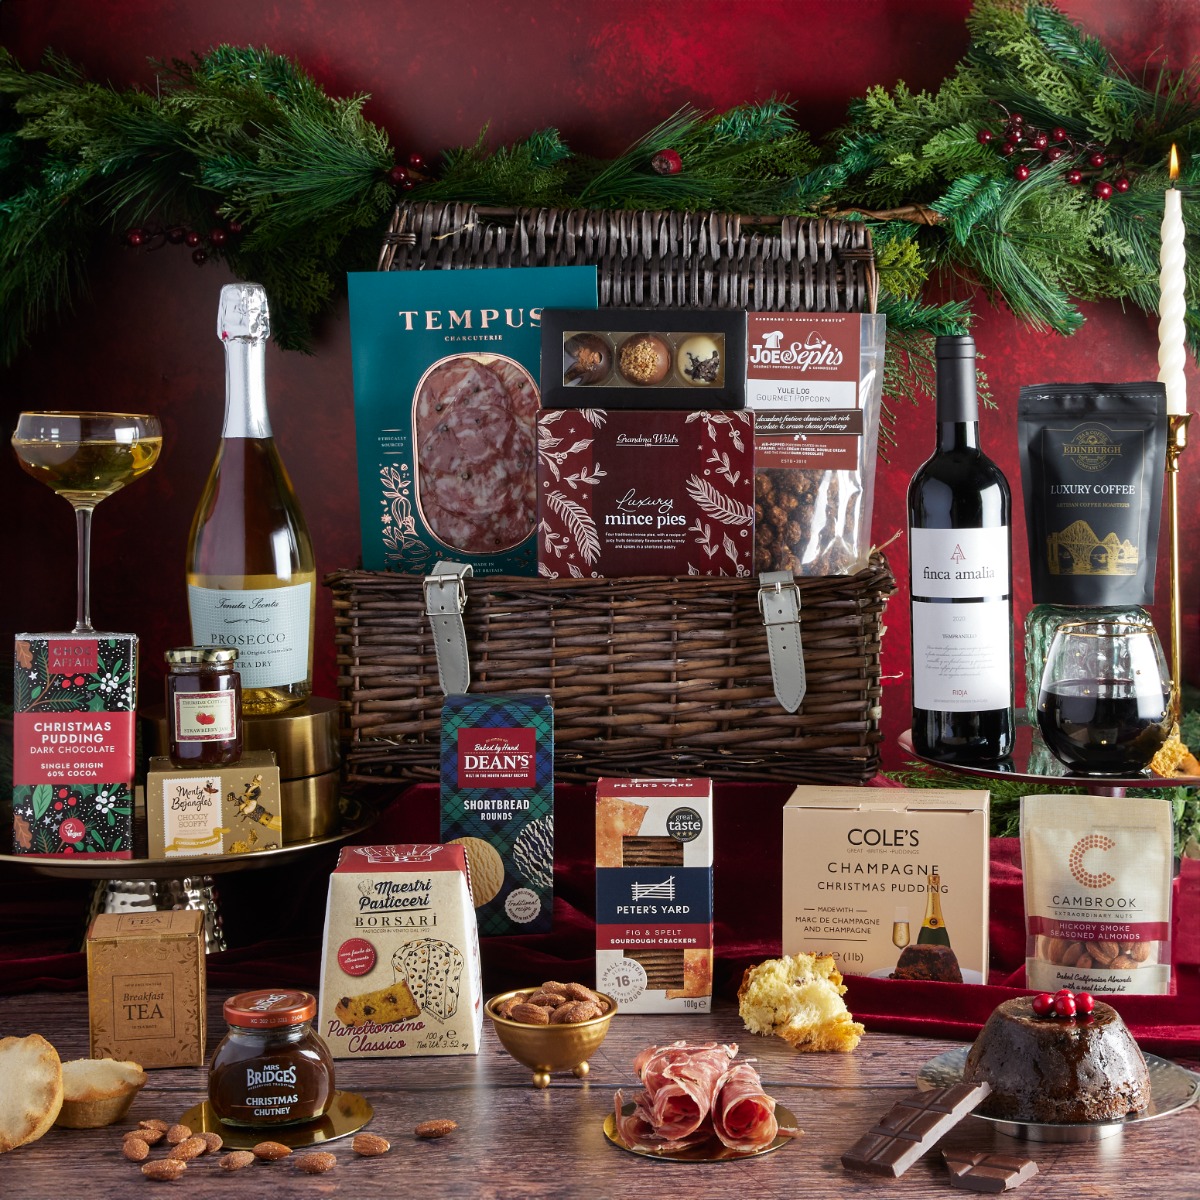 The Traditional Christmas Hamper with content on display